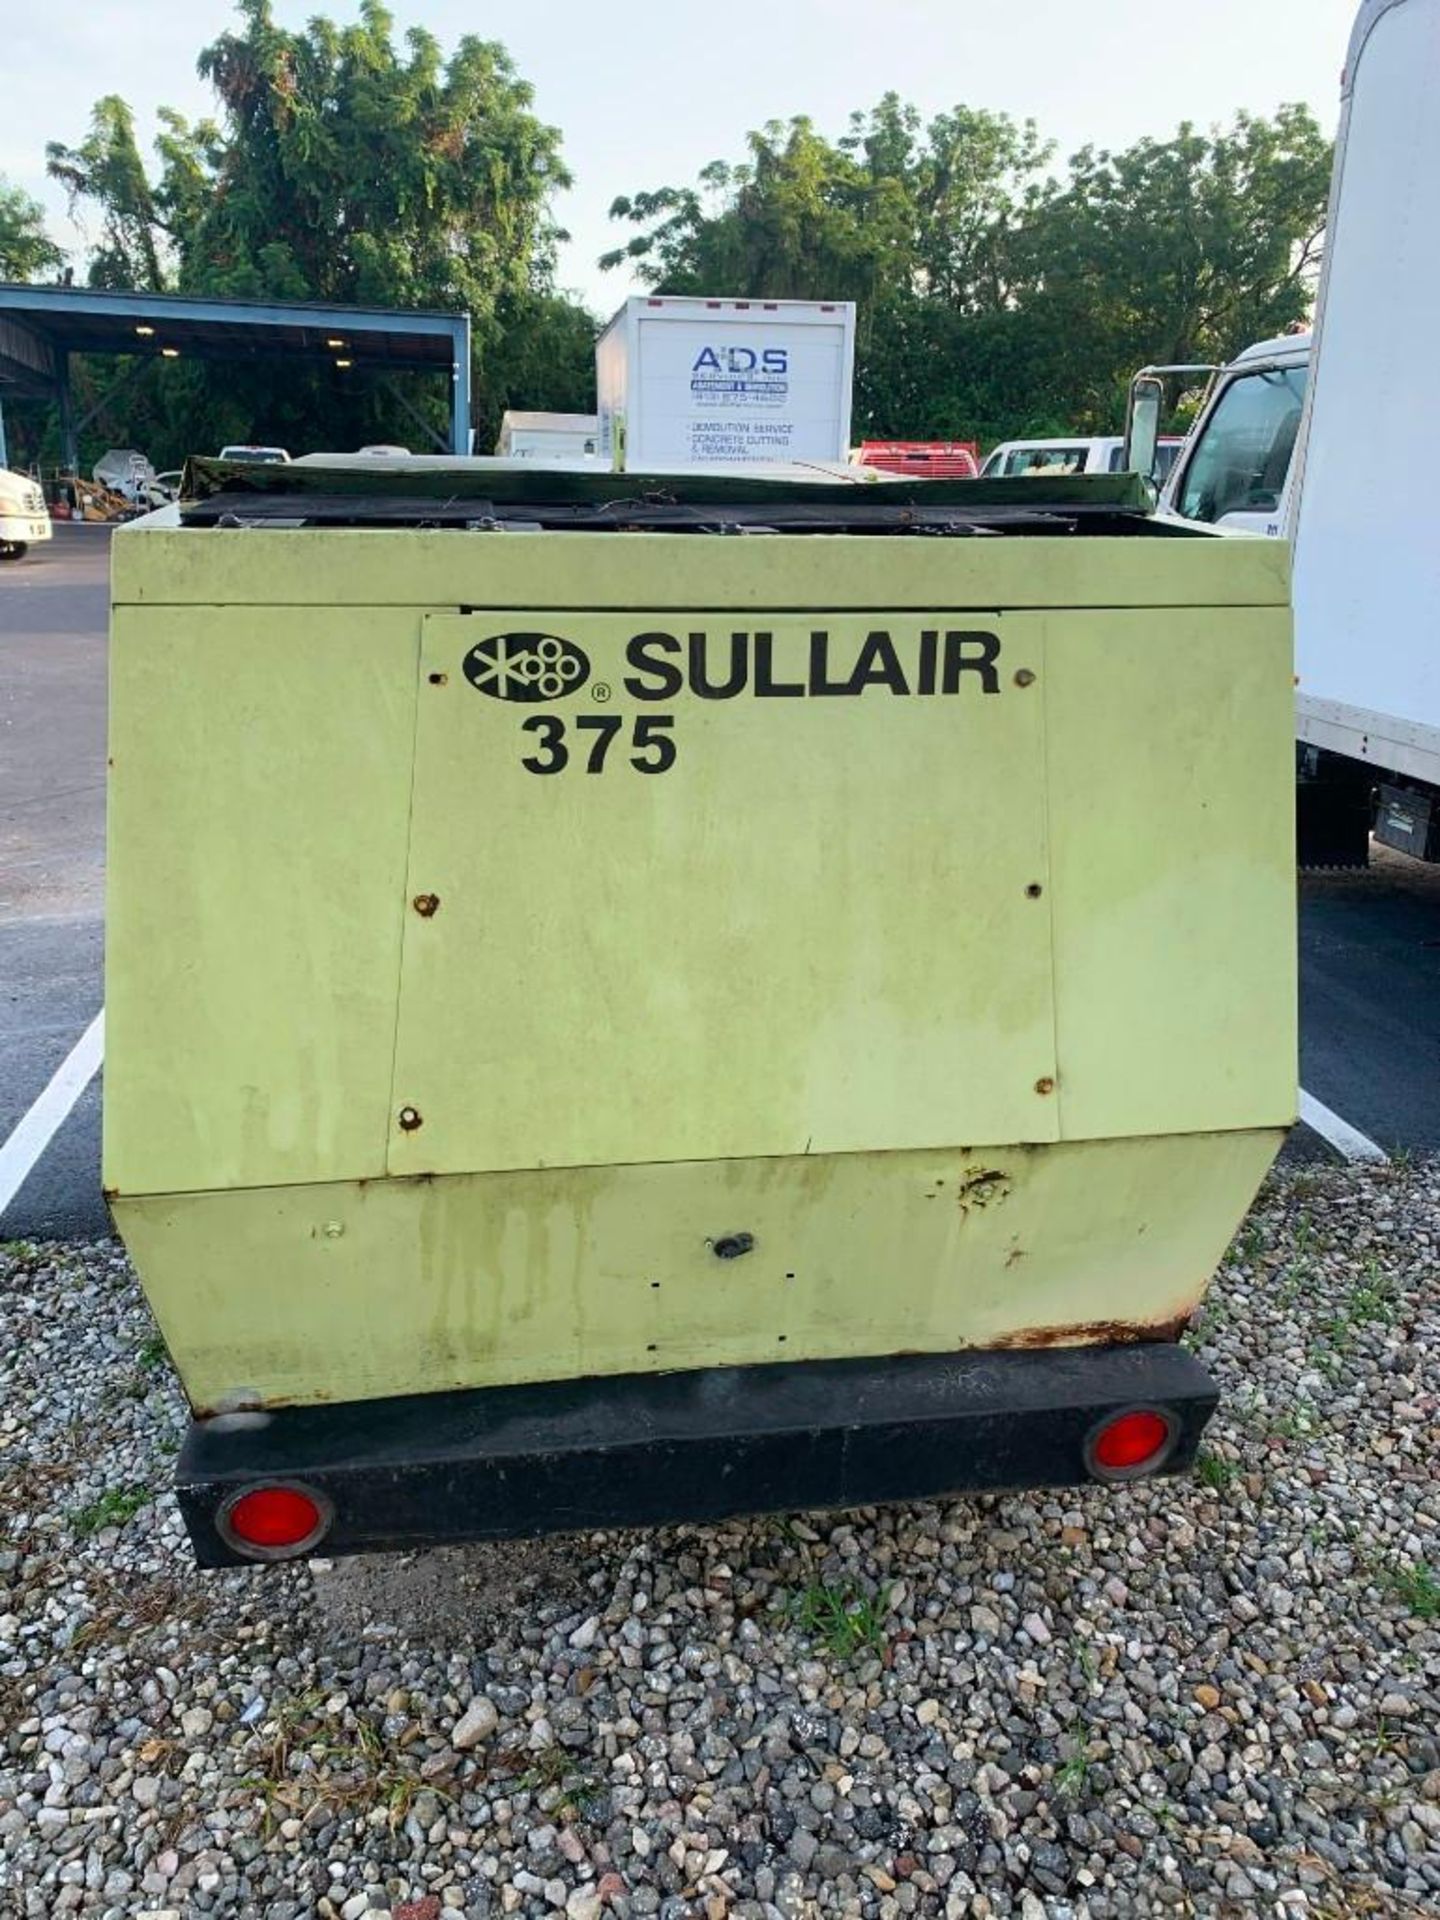 SULLAIR 375 AIR COMPRESSOR, DIESEL, JOHN DEERE ENGINE, TOW BEHIND, BILL OF SALE ONLY , CONDITION UNK - Image 4 of 12